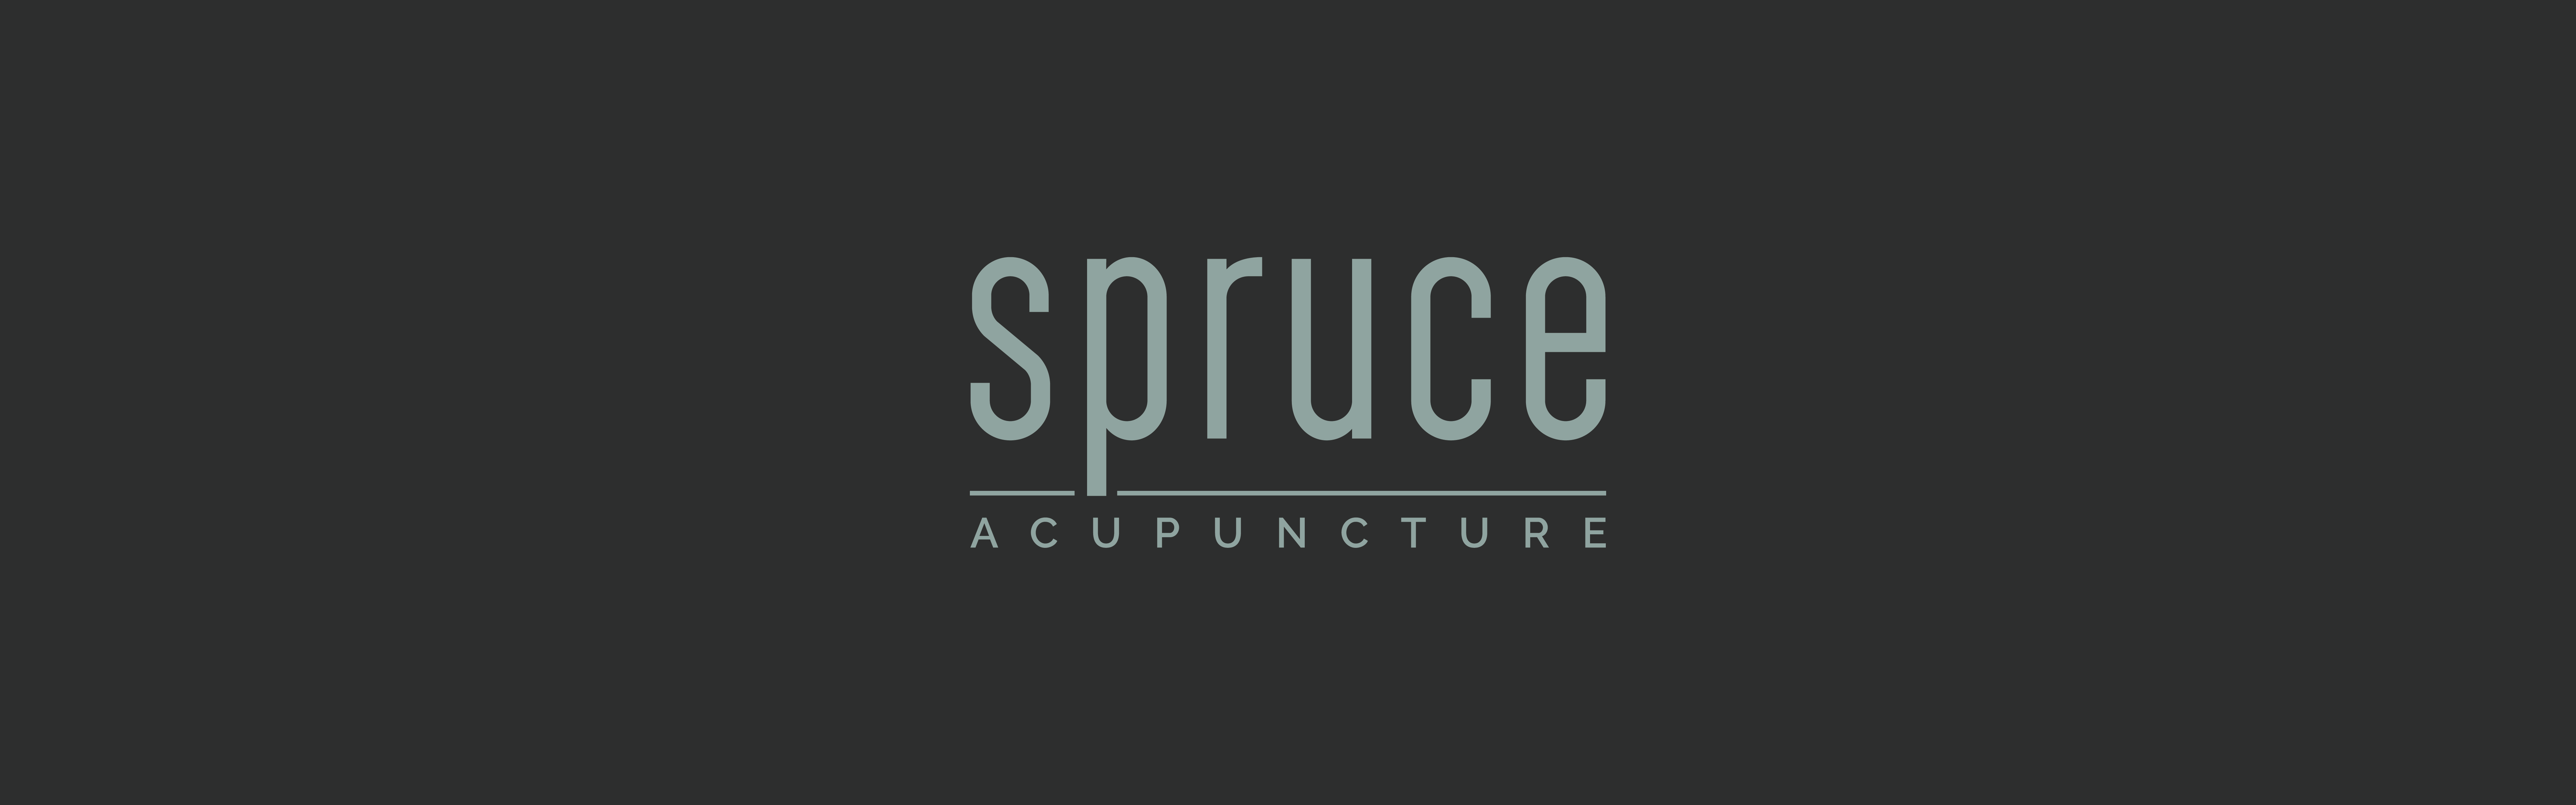 Logo of Spruce Acupuncture on a dark background featuring stylized text with a graphical element that resembles a needle or a spruce twig integrated into the letter "u".